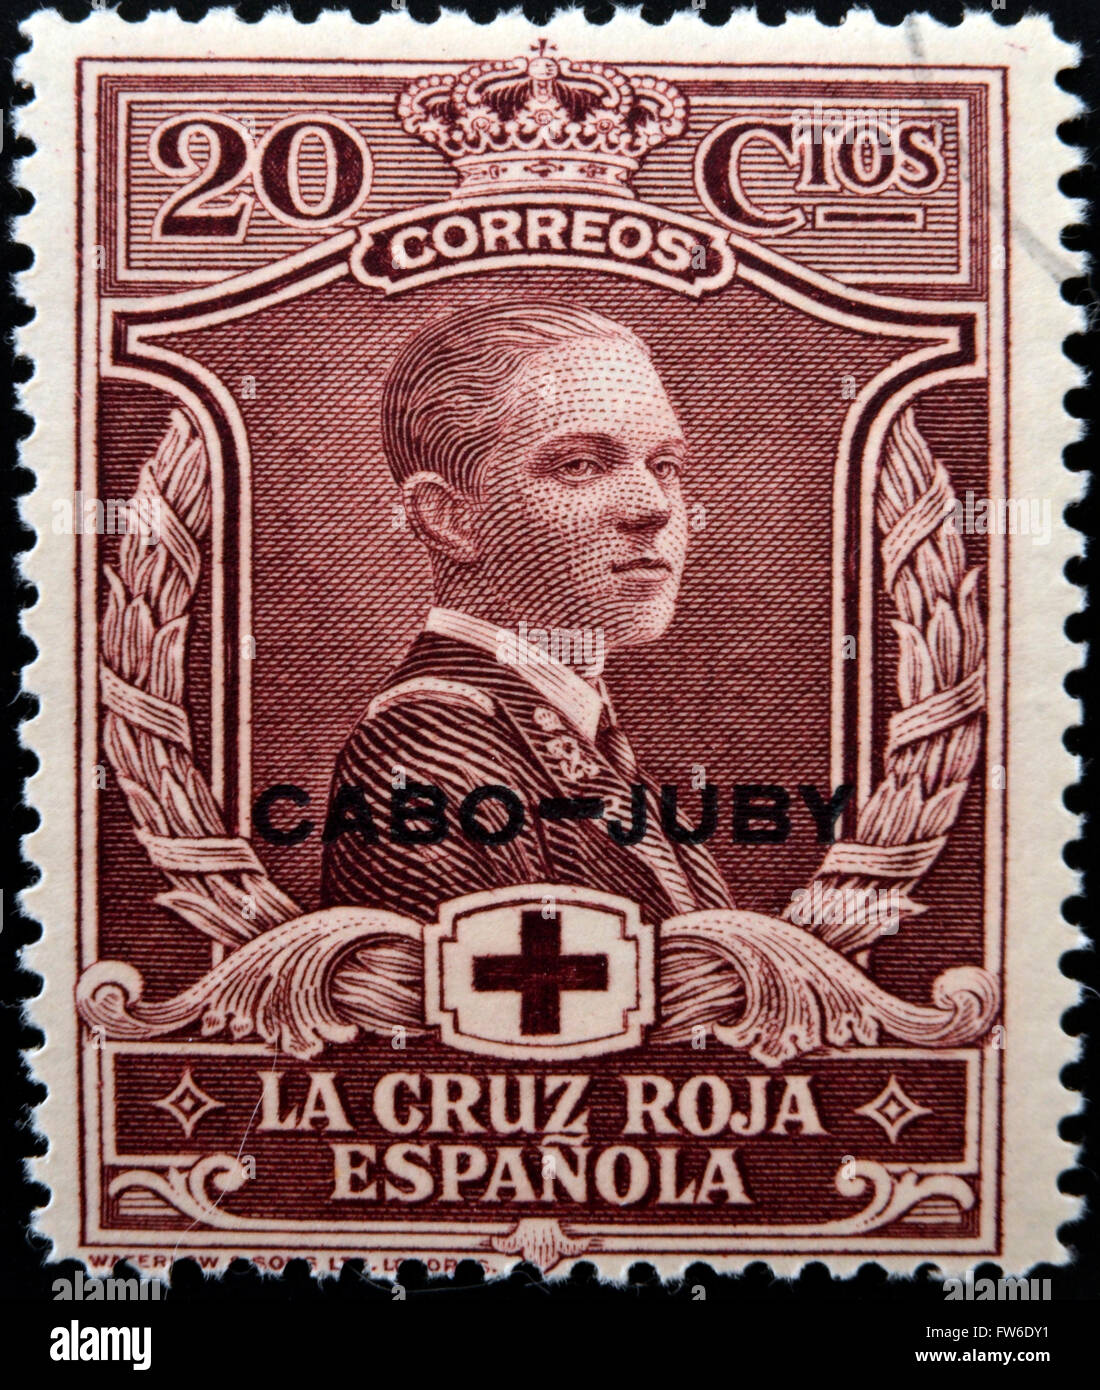 SPAIN - CIRCA 1907: A stamp printed in Spain shows Alfonso XII, circa 1907 Stock Photo